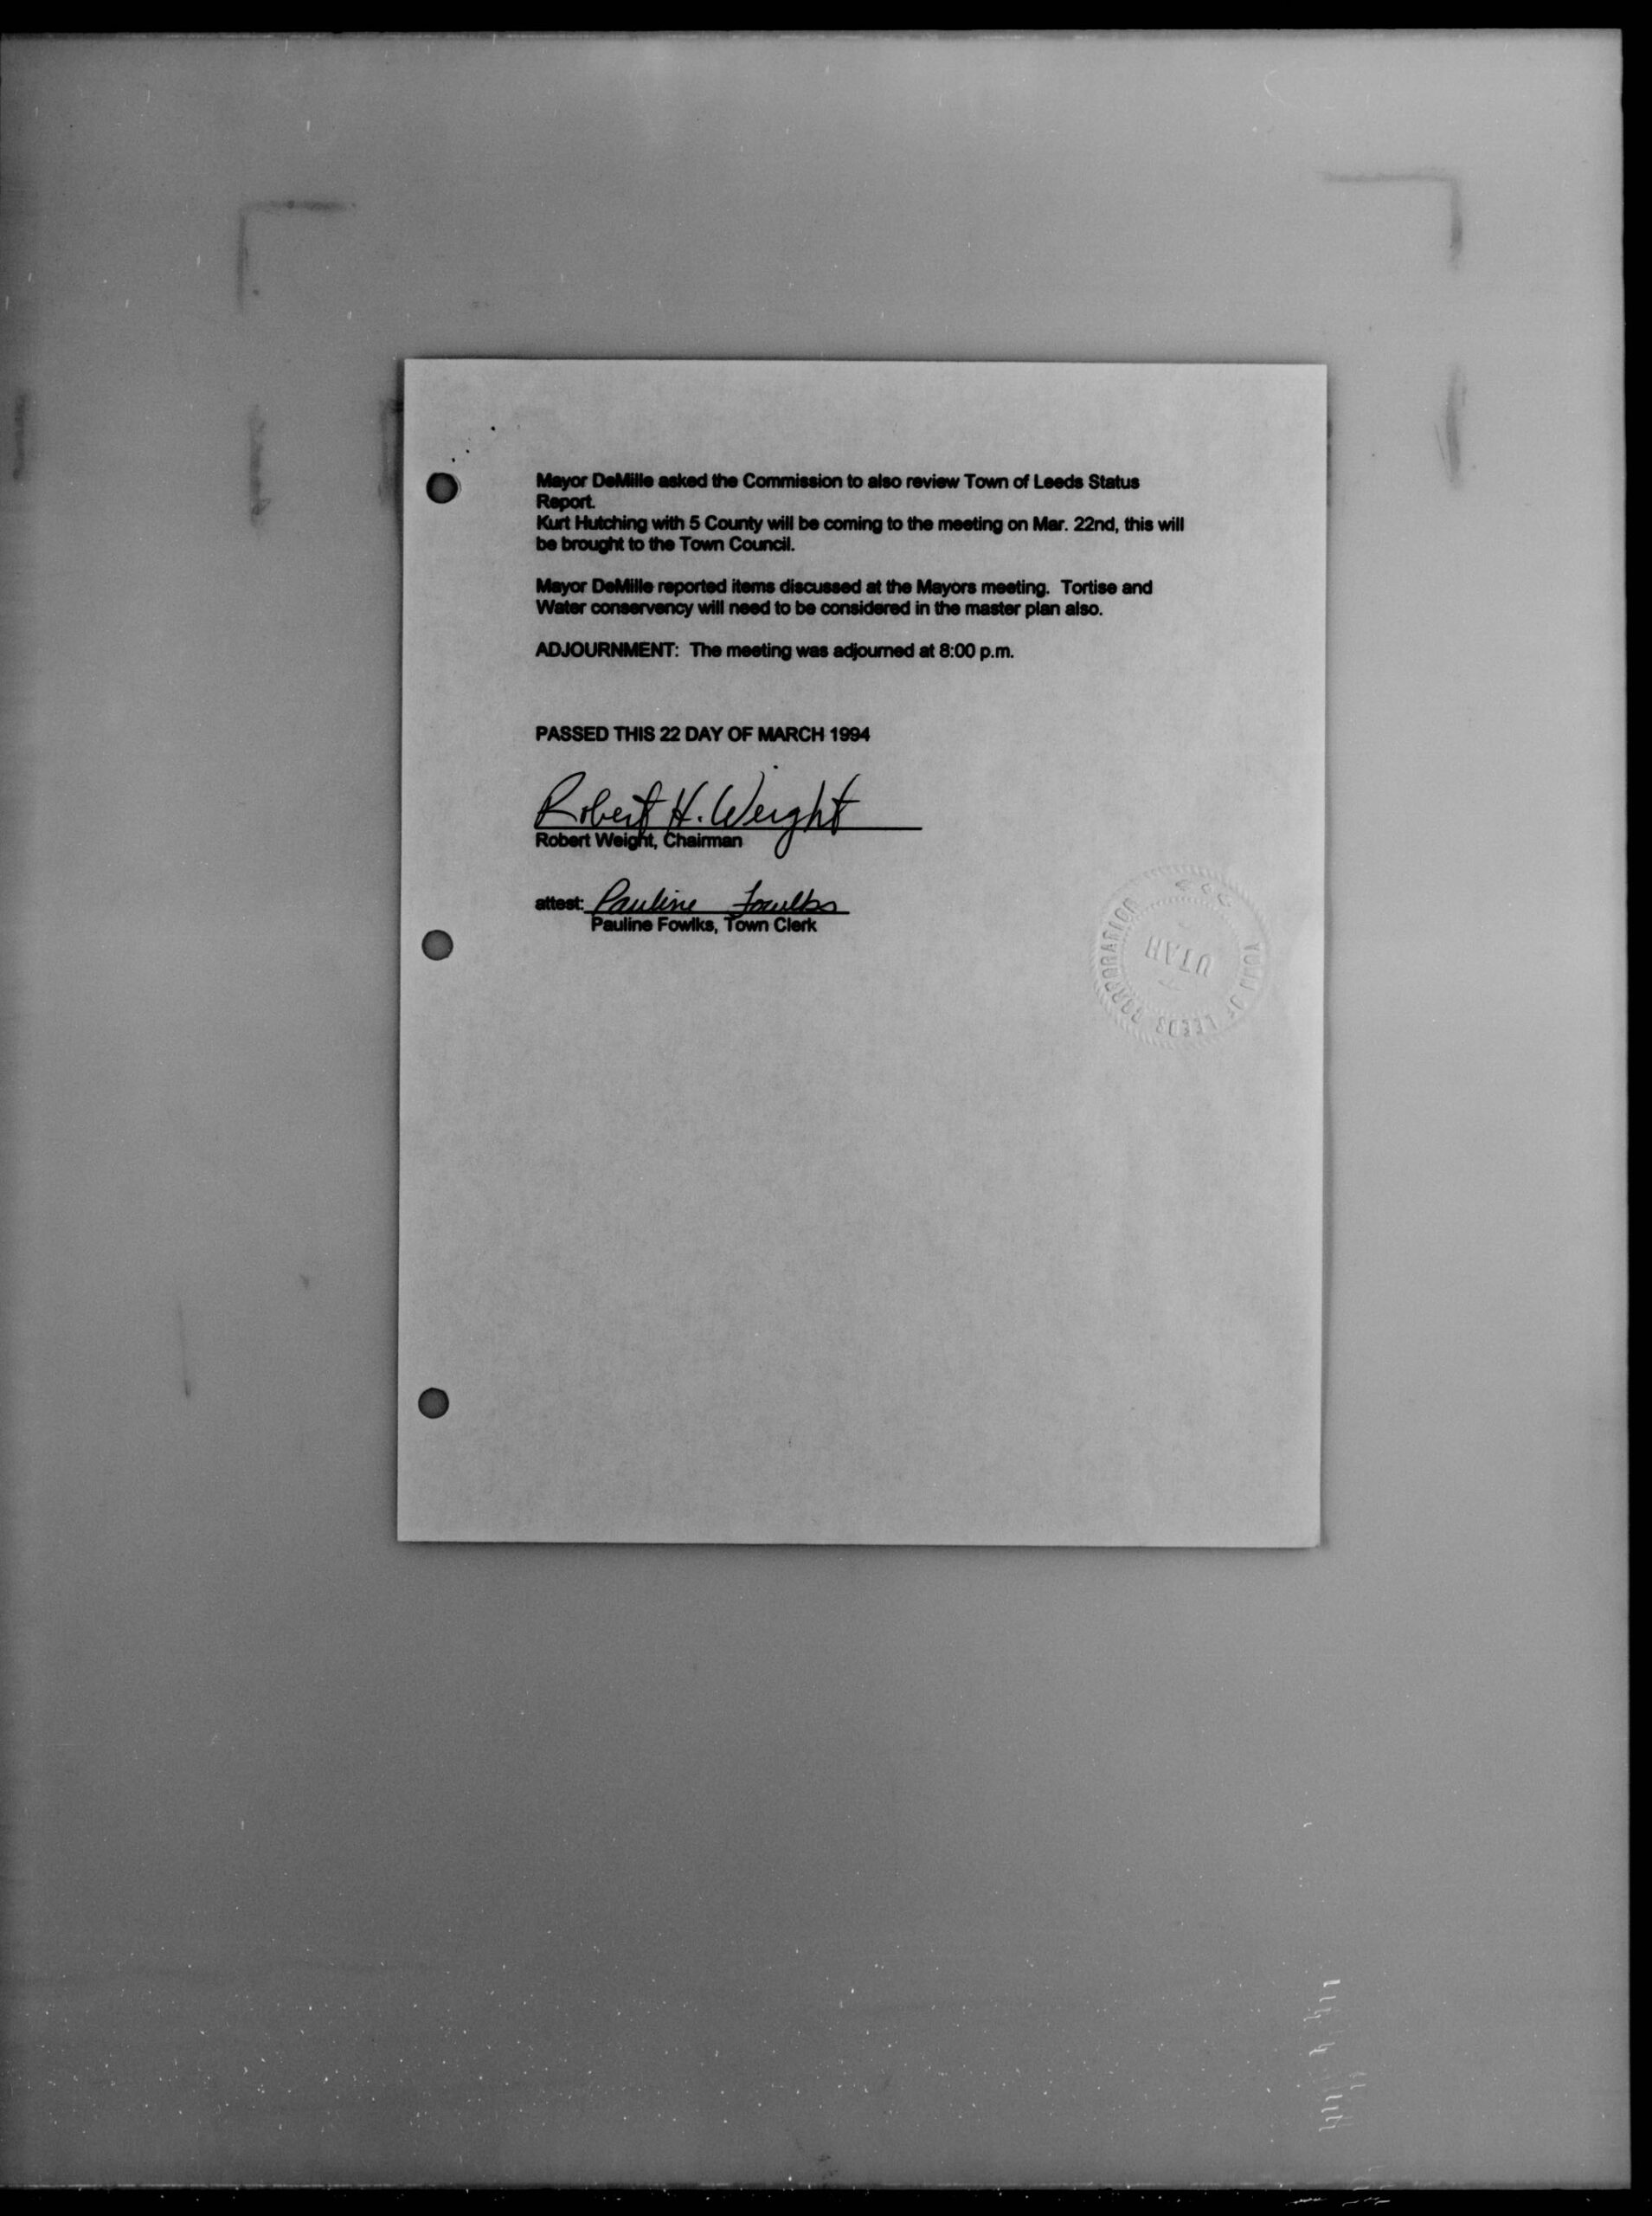 A piece of paper with writing on it

Description automatically generated